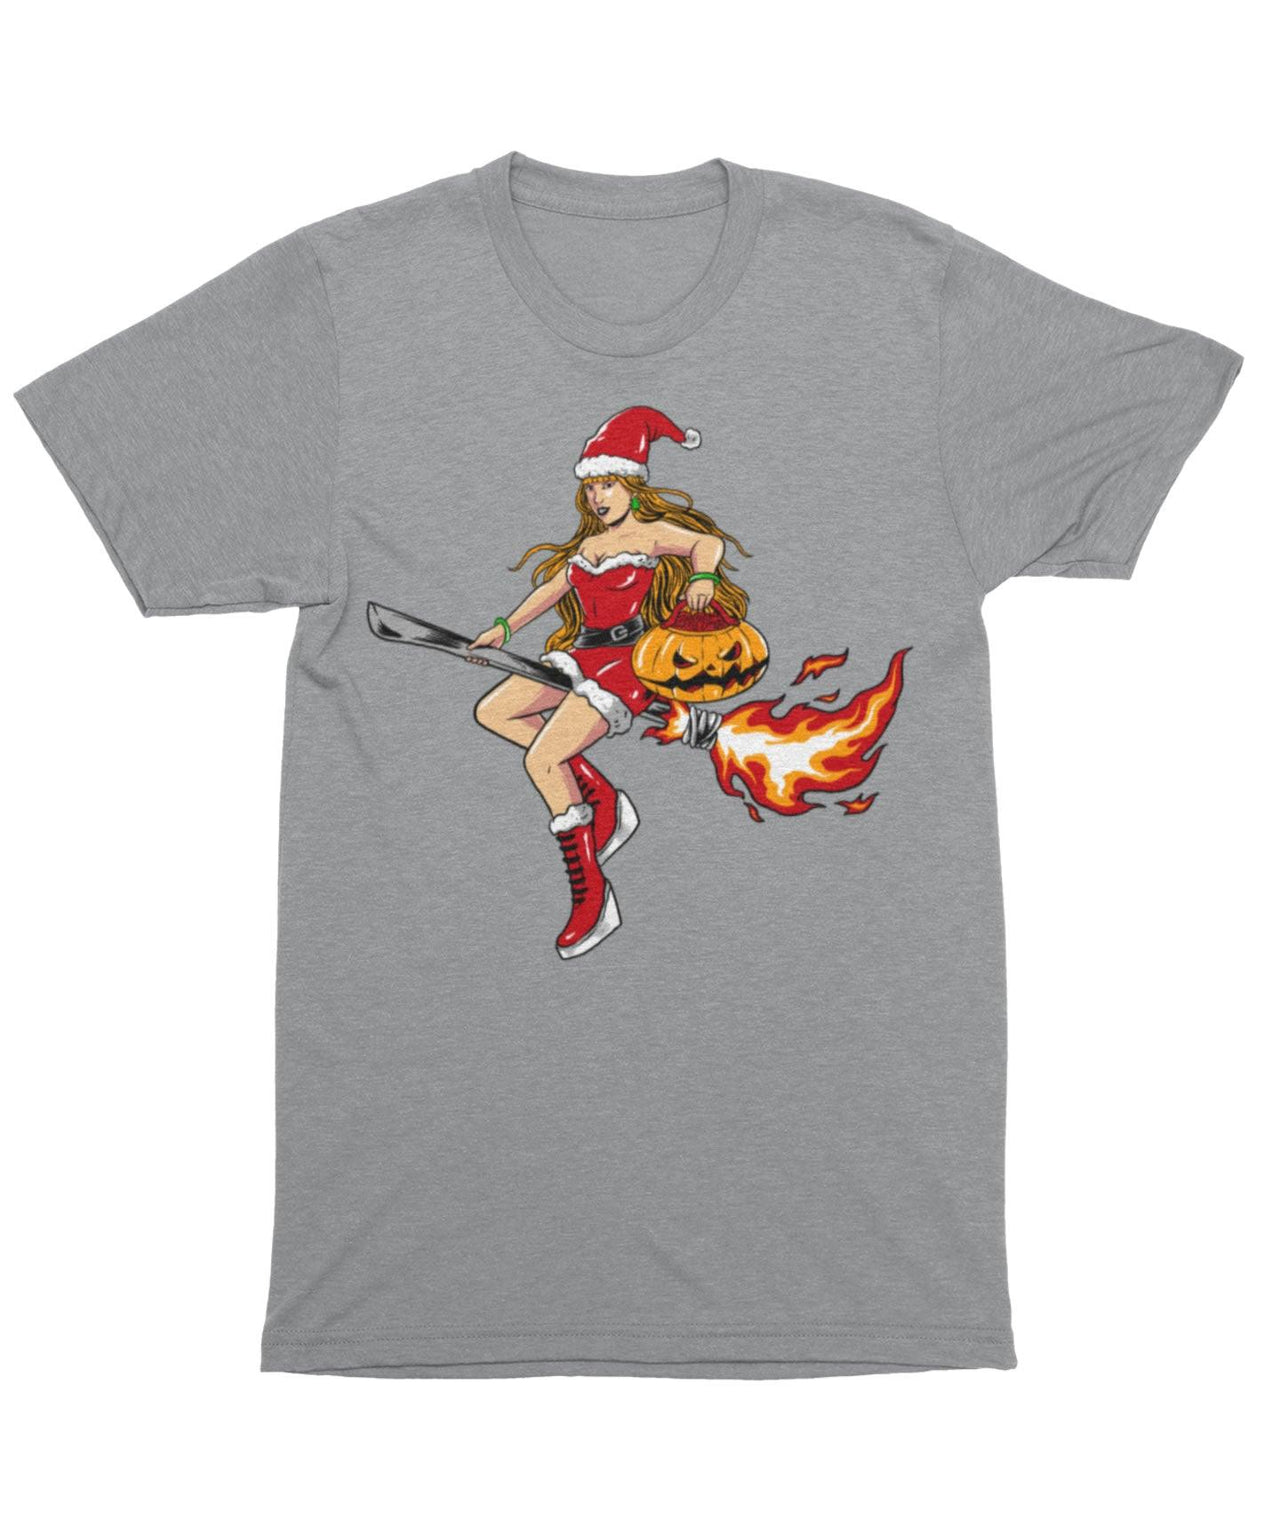 Moon Witch Santa Unisex Christmas Graphic T-Shirt For Men 8Ball